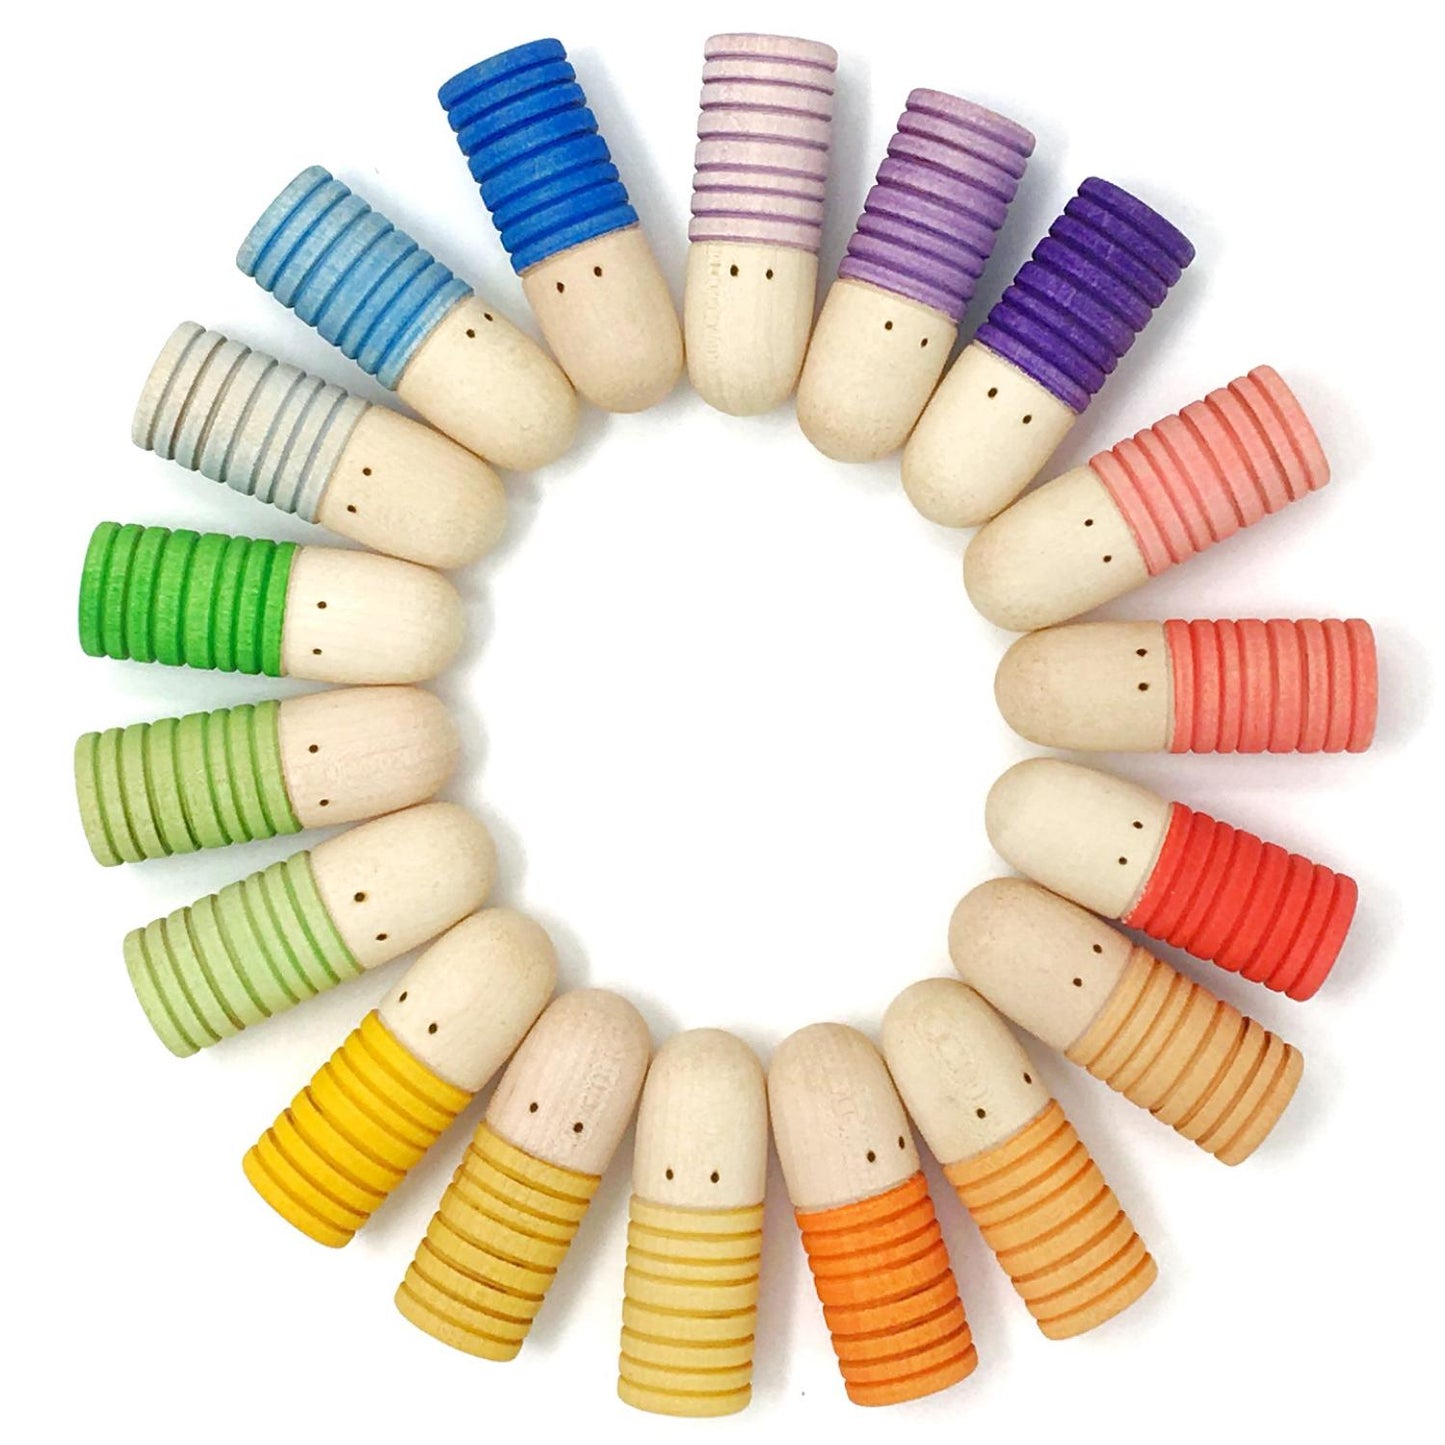 Grapat Brots | Wooden Toys for Kids | Open-Ended Play Set | Circle Grapat Brots | BeoVERDE.ie